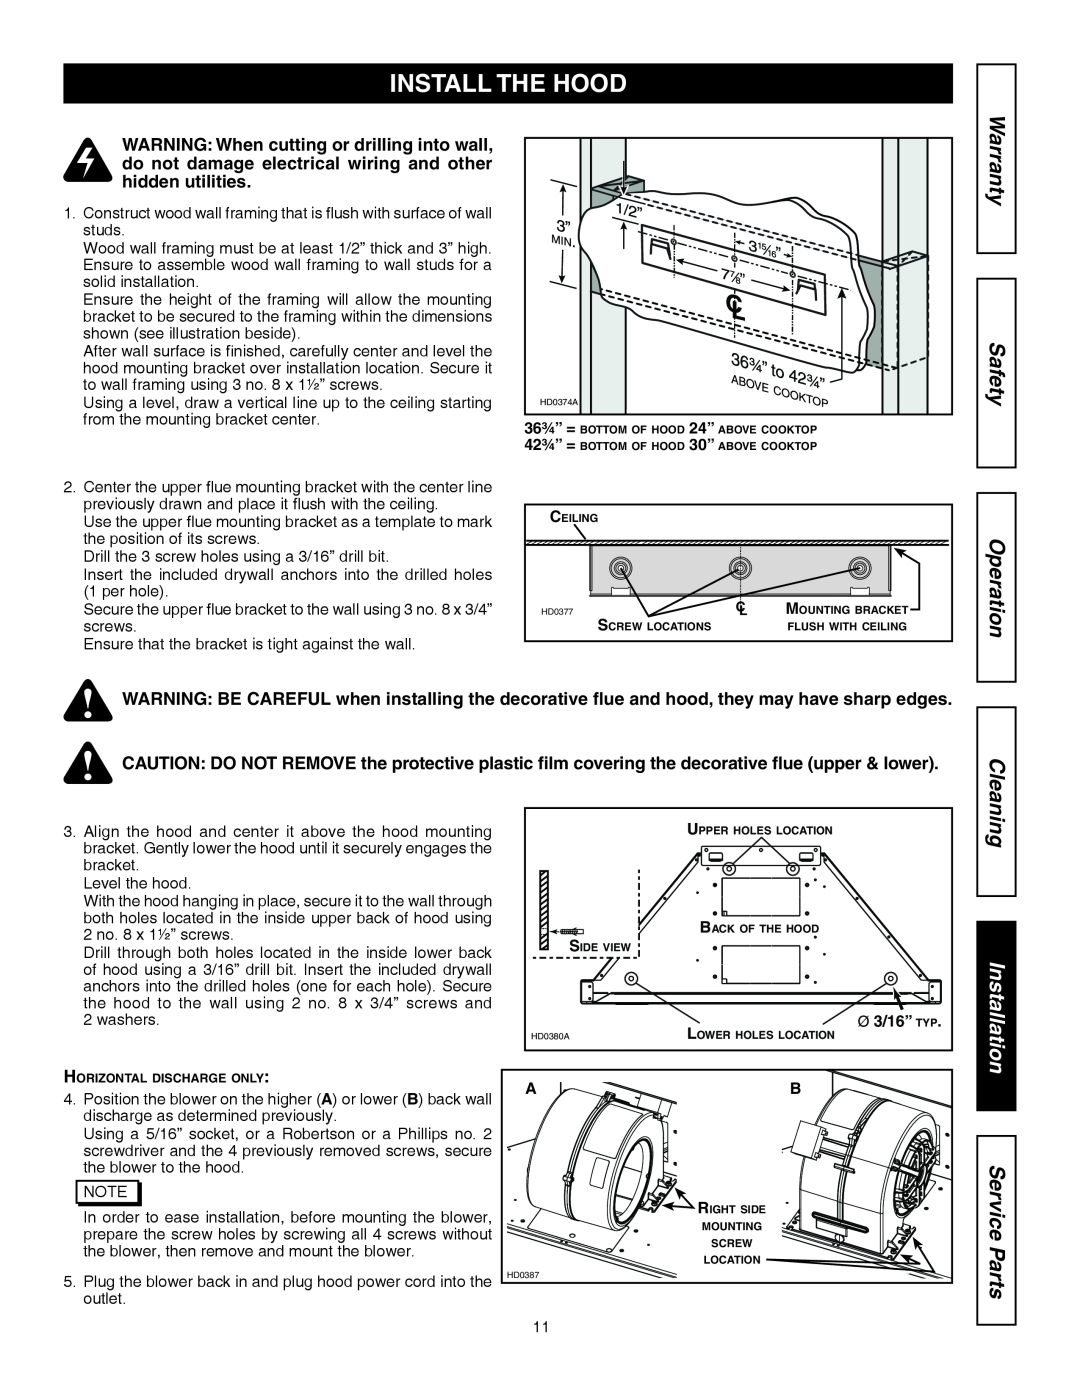 Kenmore 31130, 31133 installation manual Install The Hood, Safety, Cleaning 